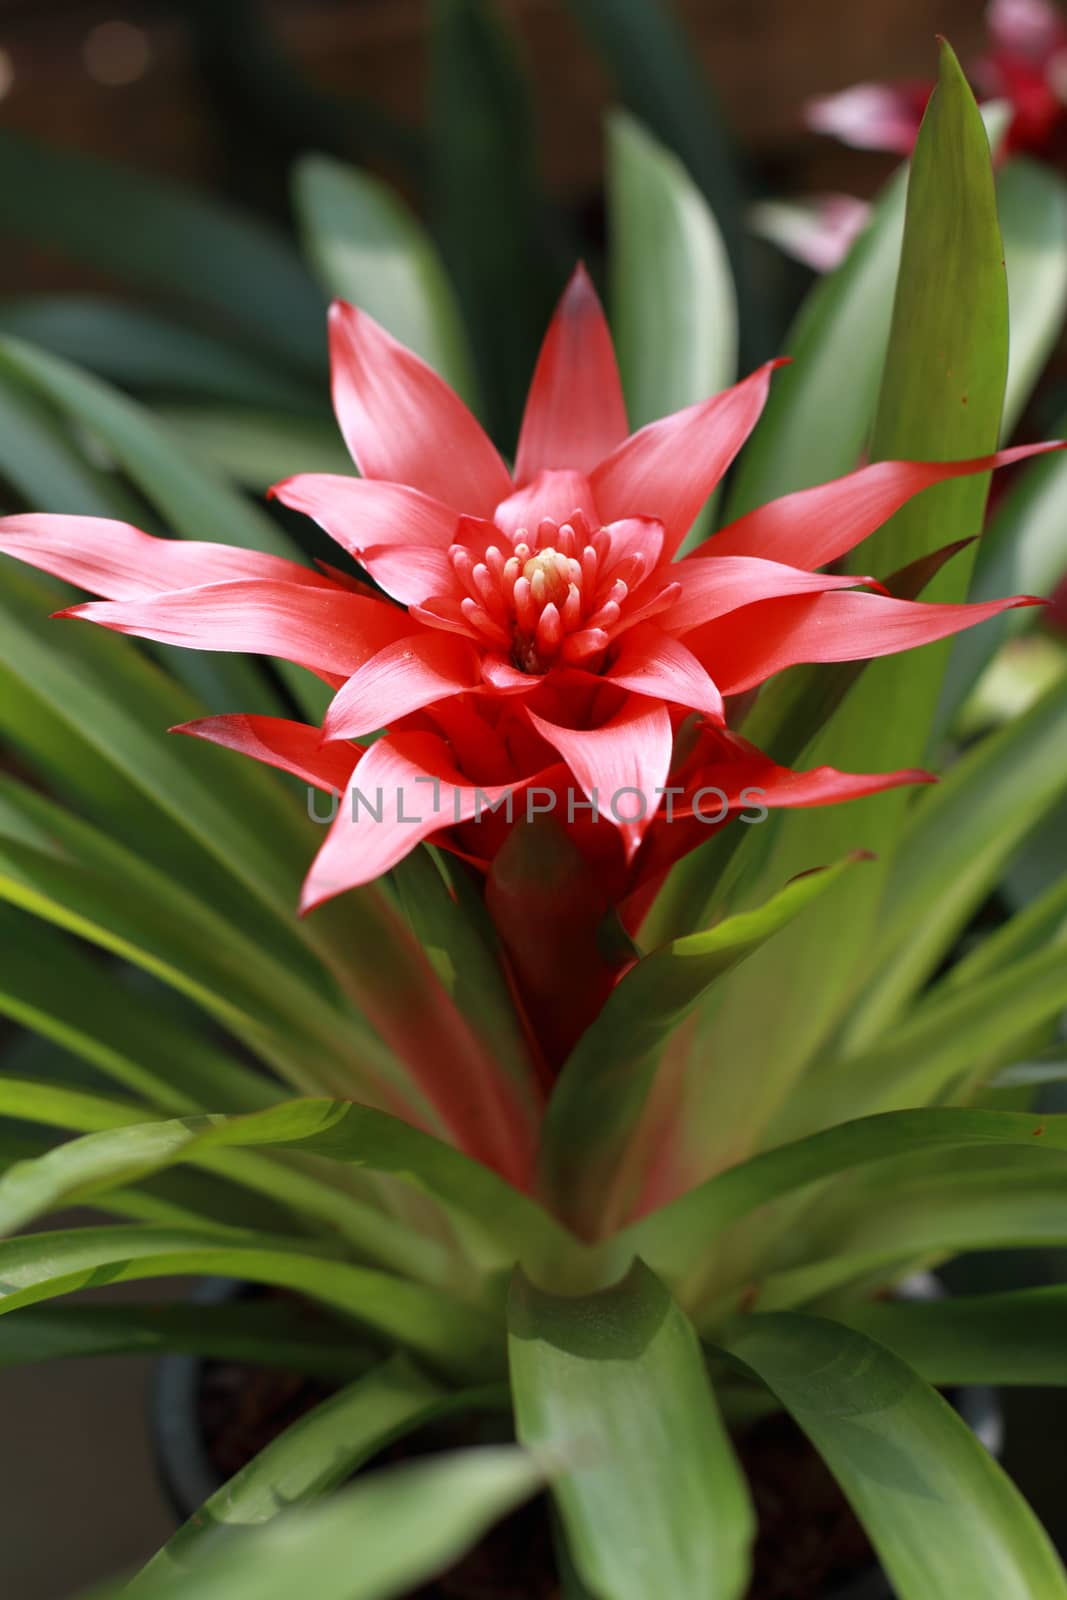 Bromeliads is a plant that has leaves and beautiful flower